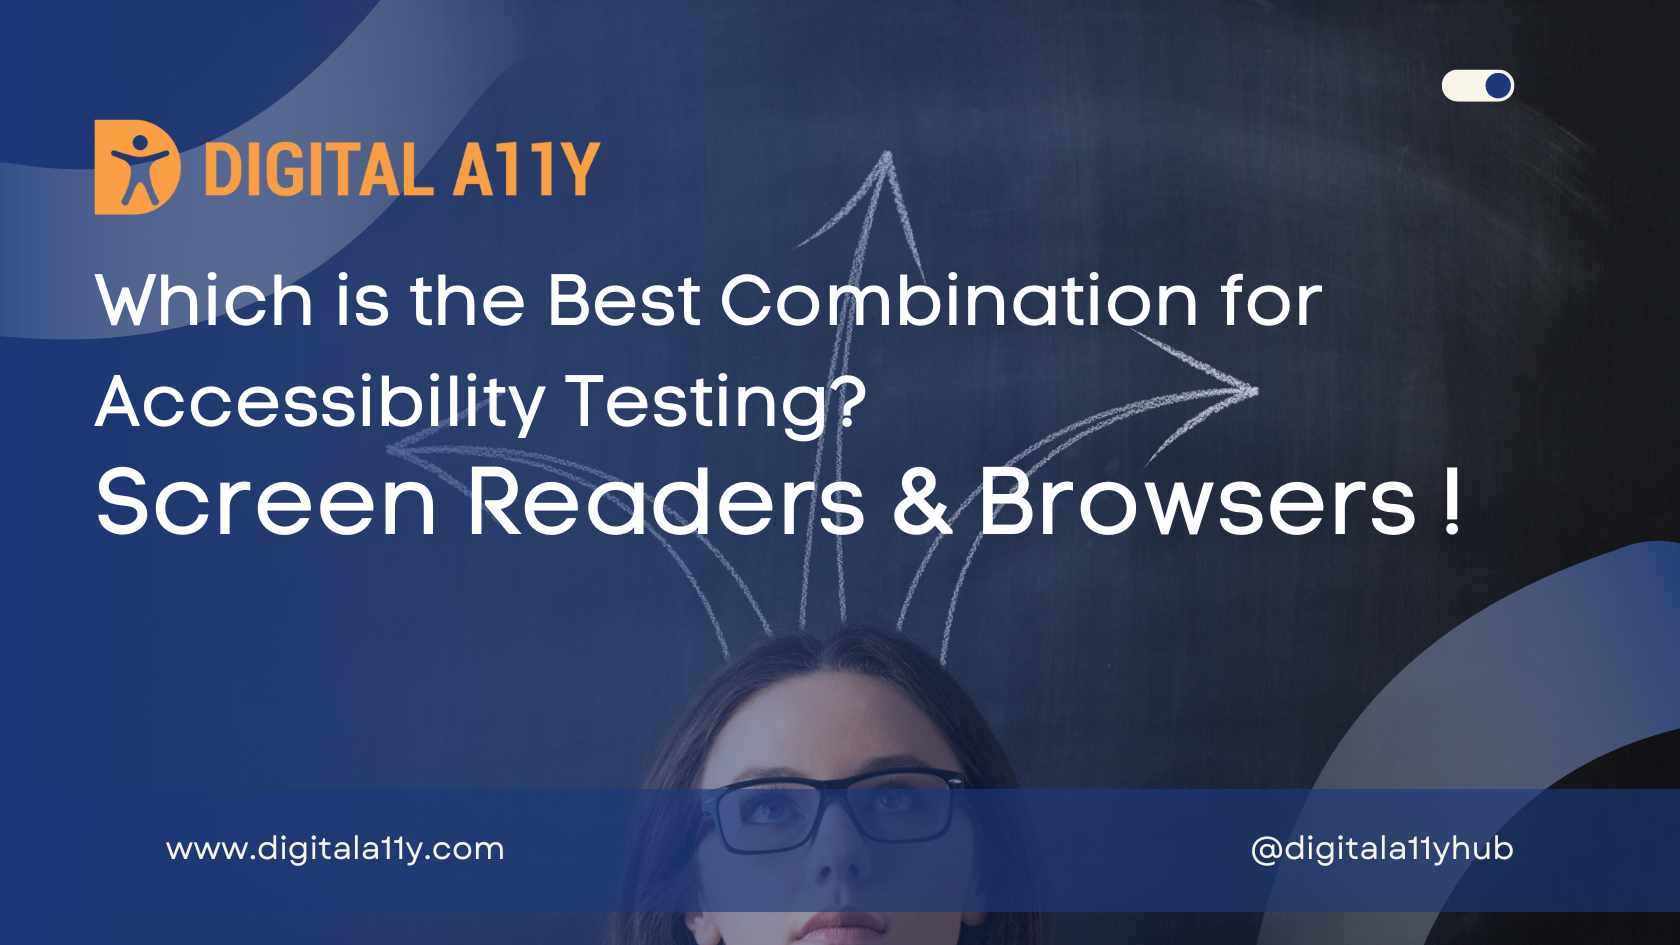 Screen Readers and Browsers! Which is the Best Combination for Accessibility Testing?